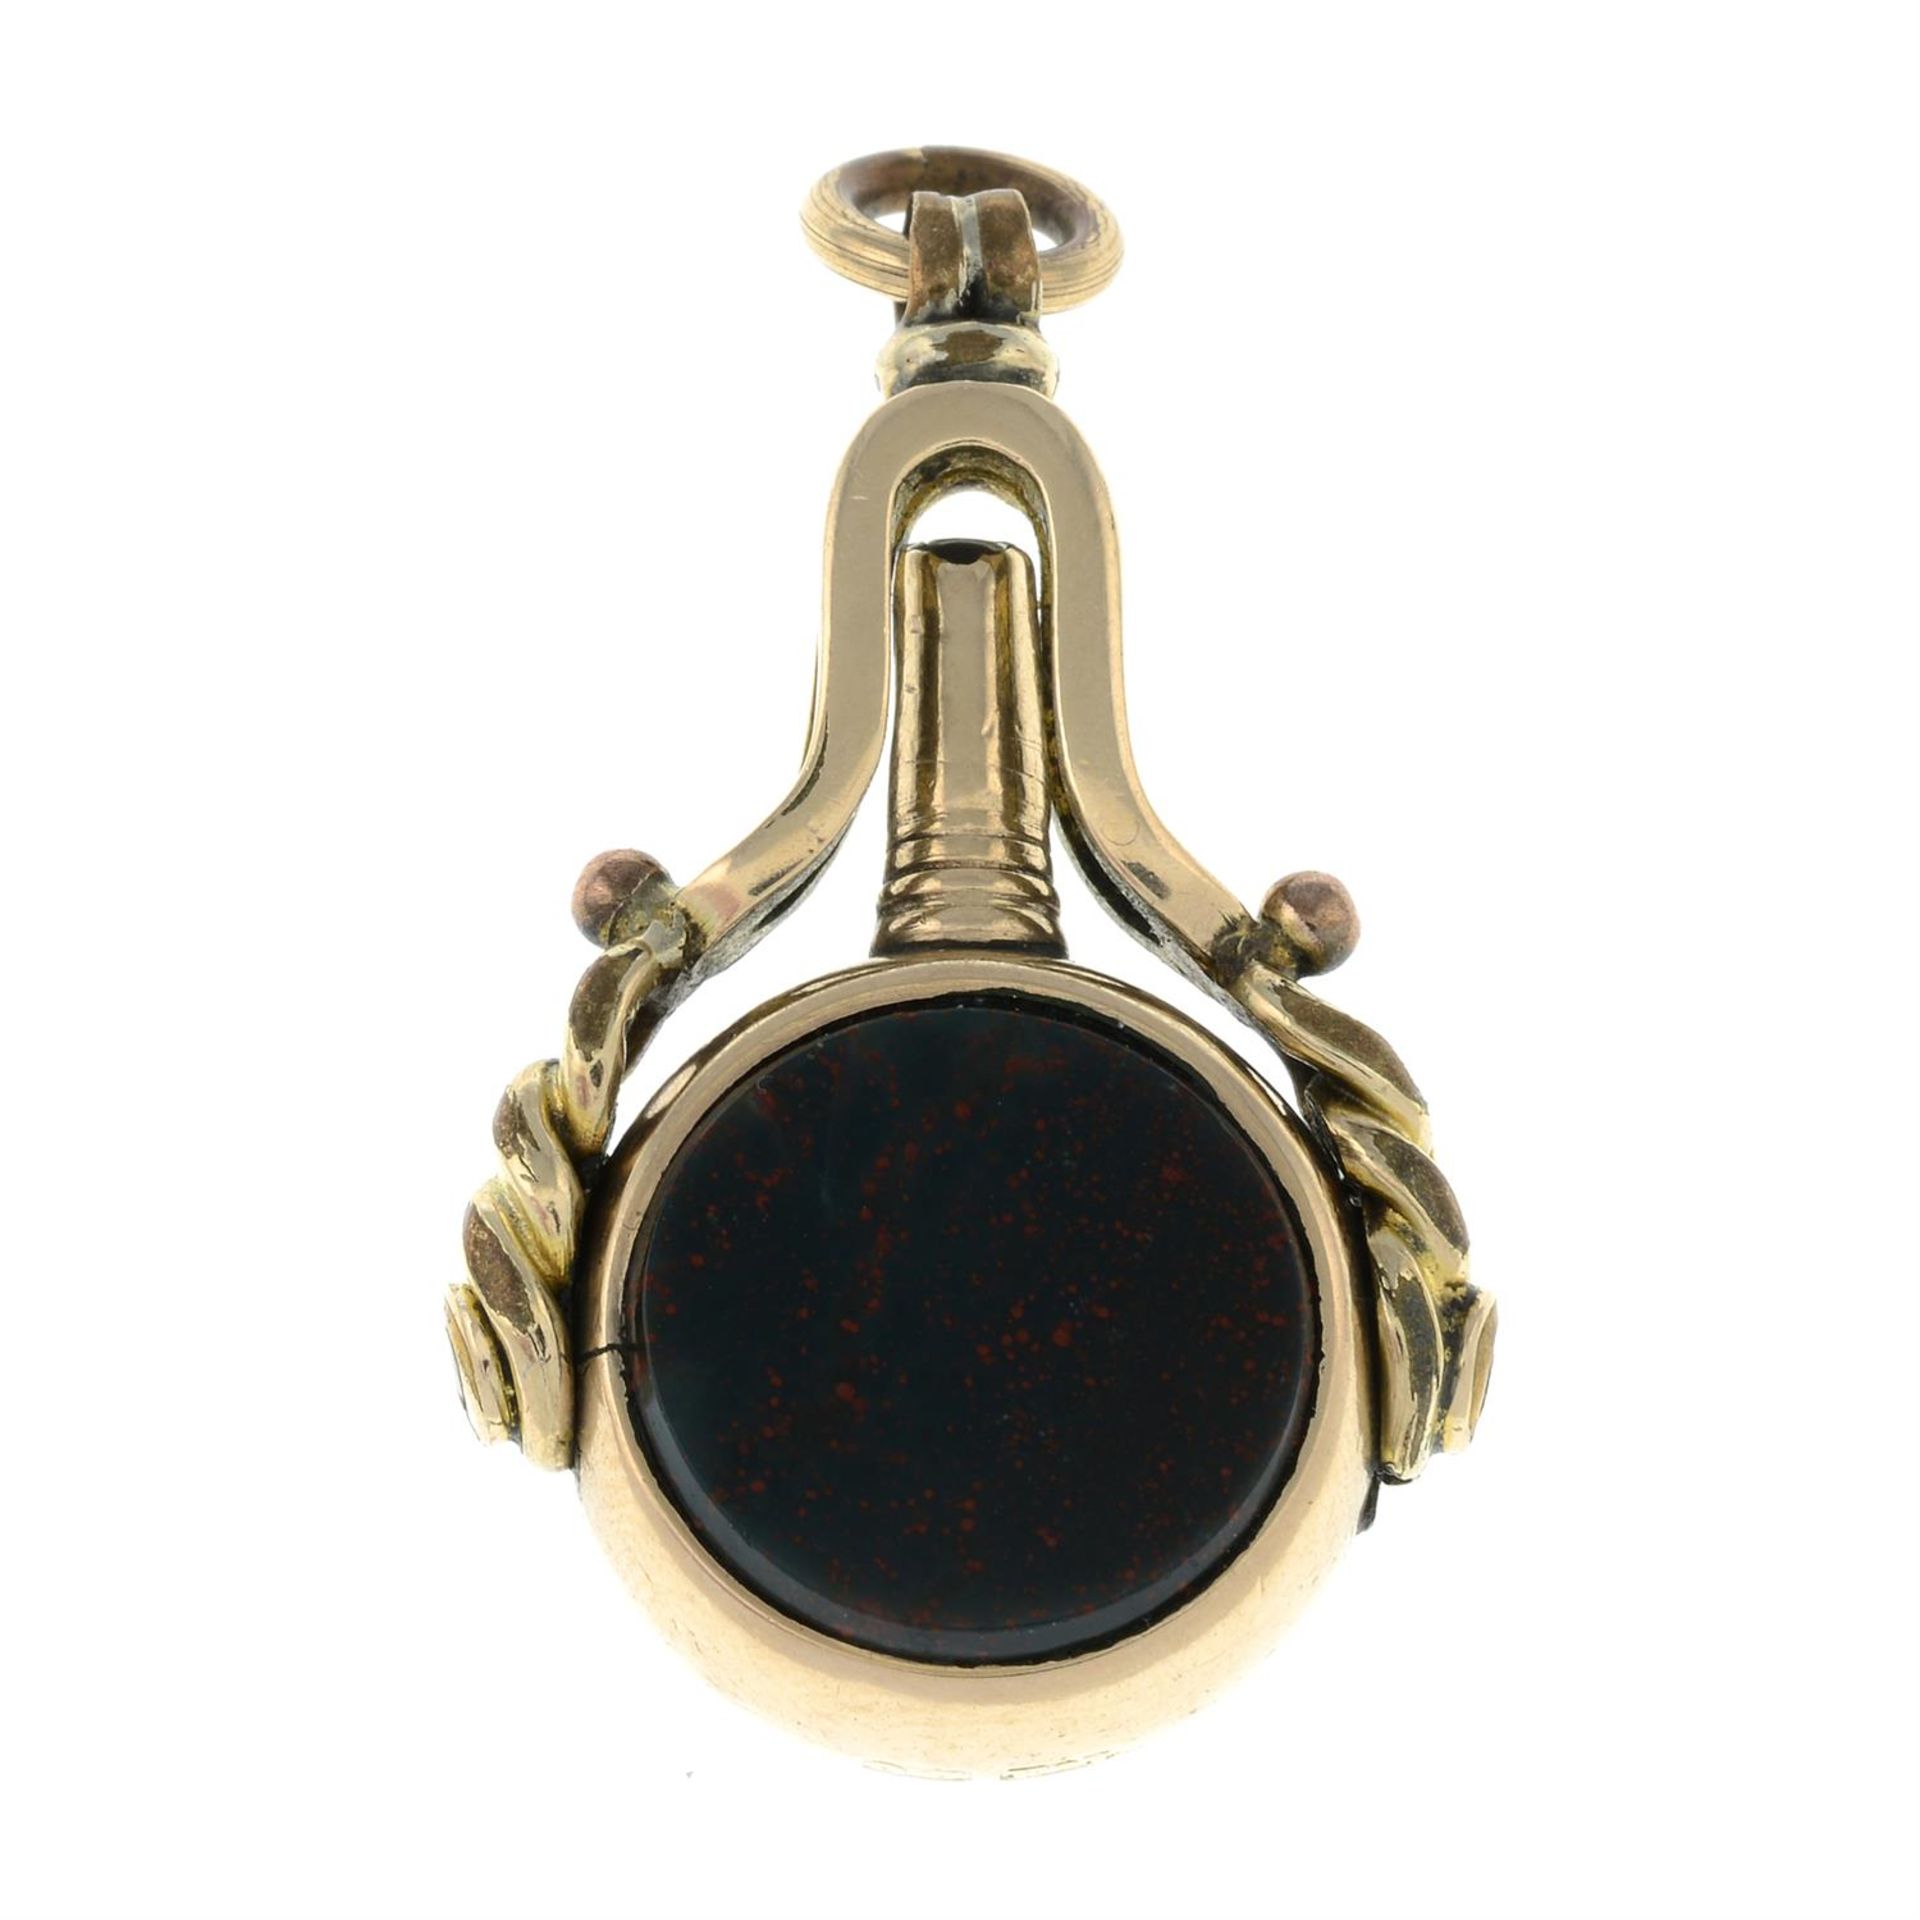 A late Victorian 9ct gold carnelian and bloodstone swivel fob watch key. - Image 2 of 2